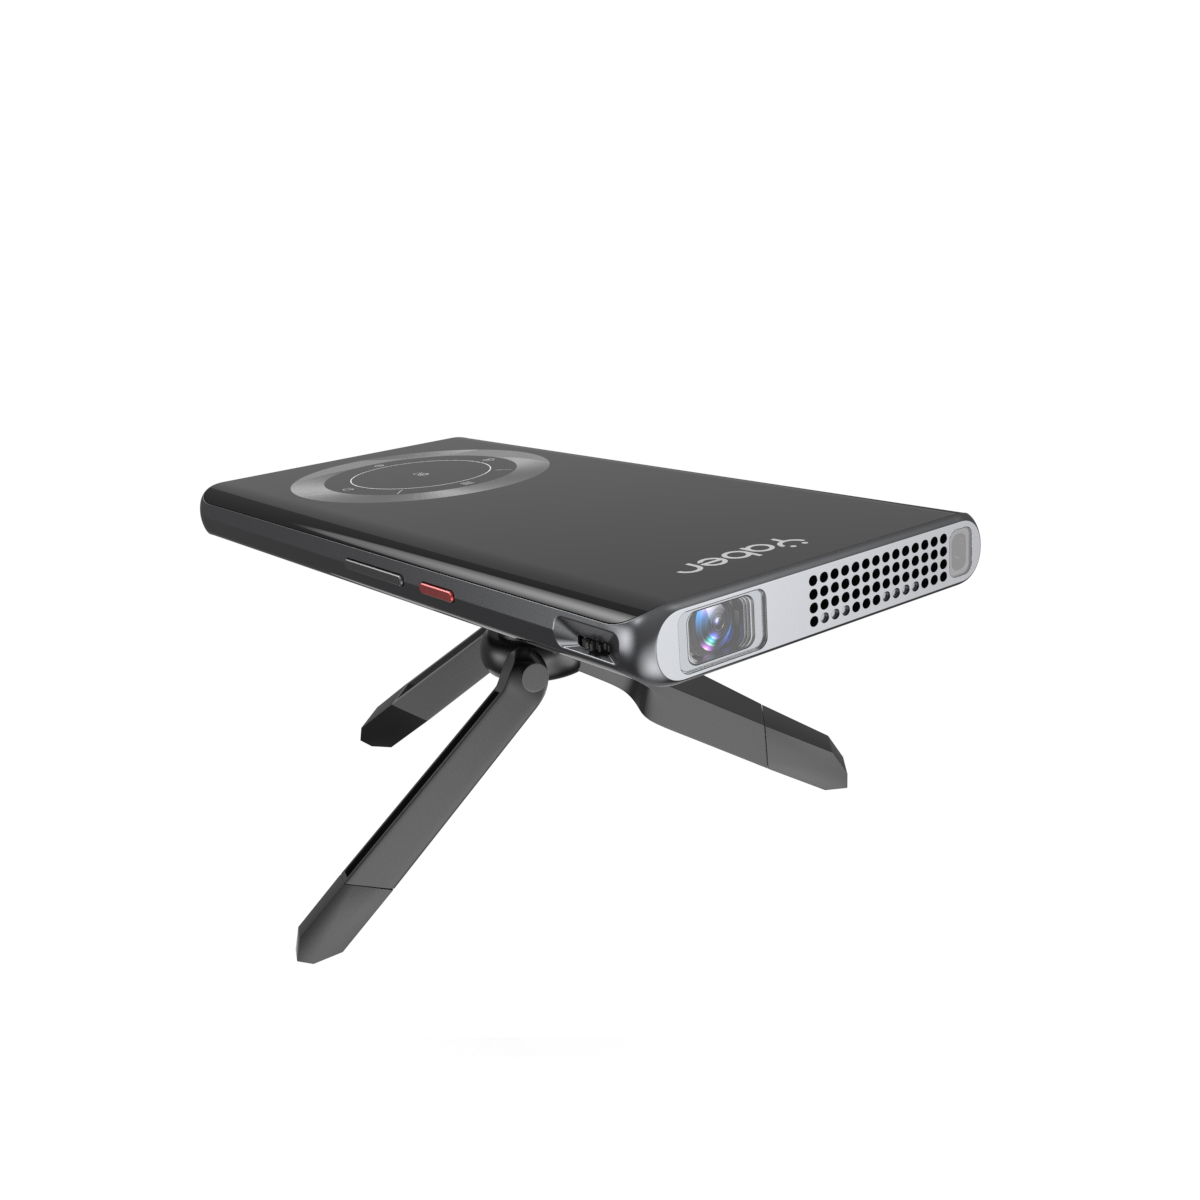 YABER PROJECTOR PICO T1 - YABER Entertainment Projector